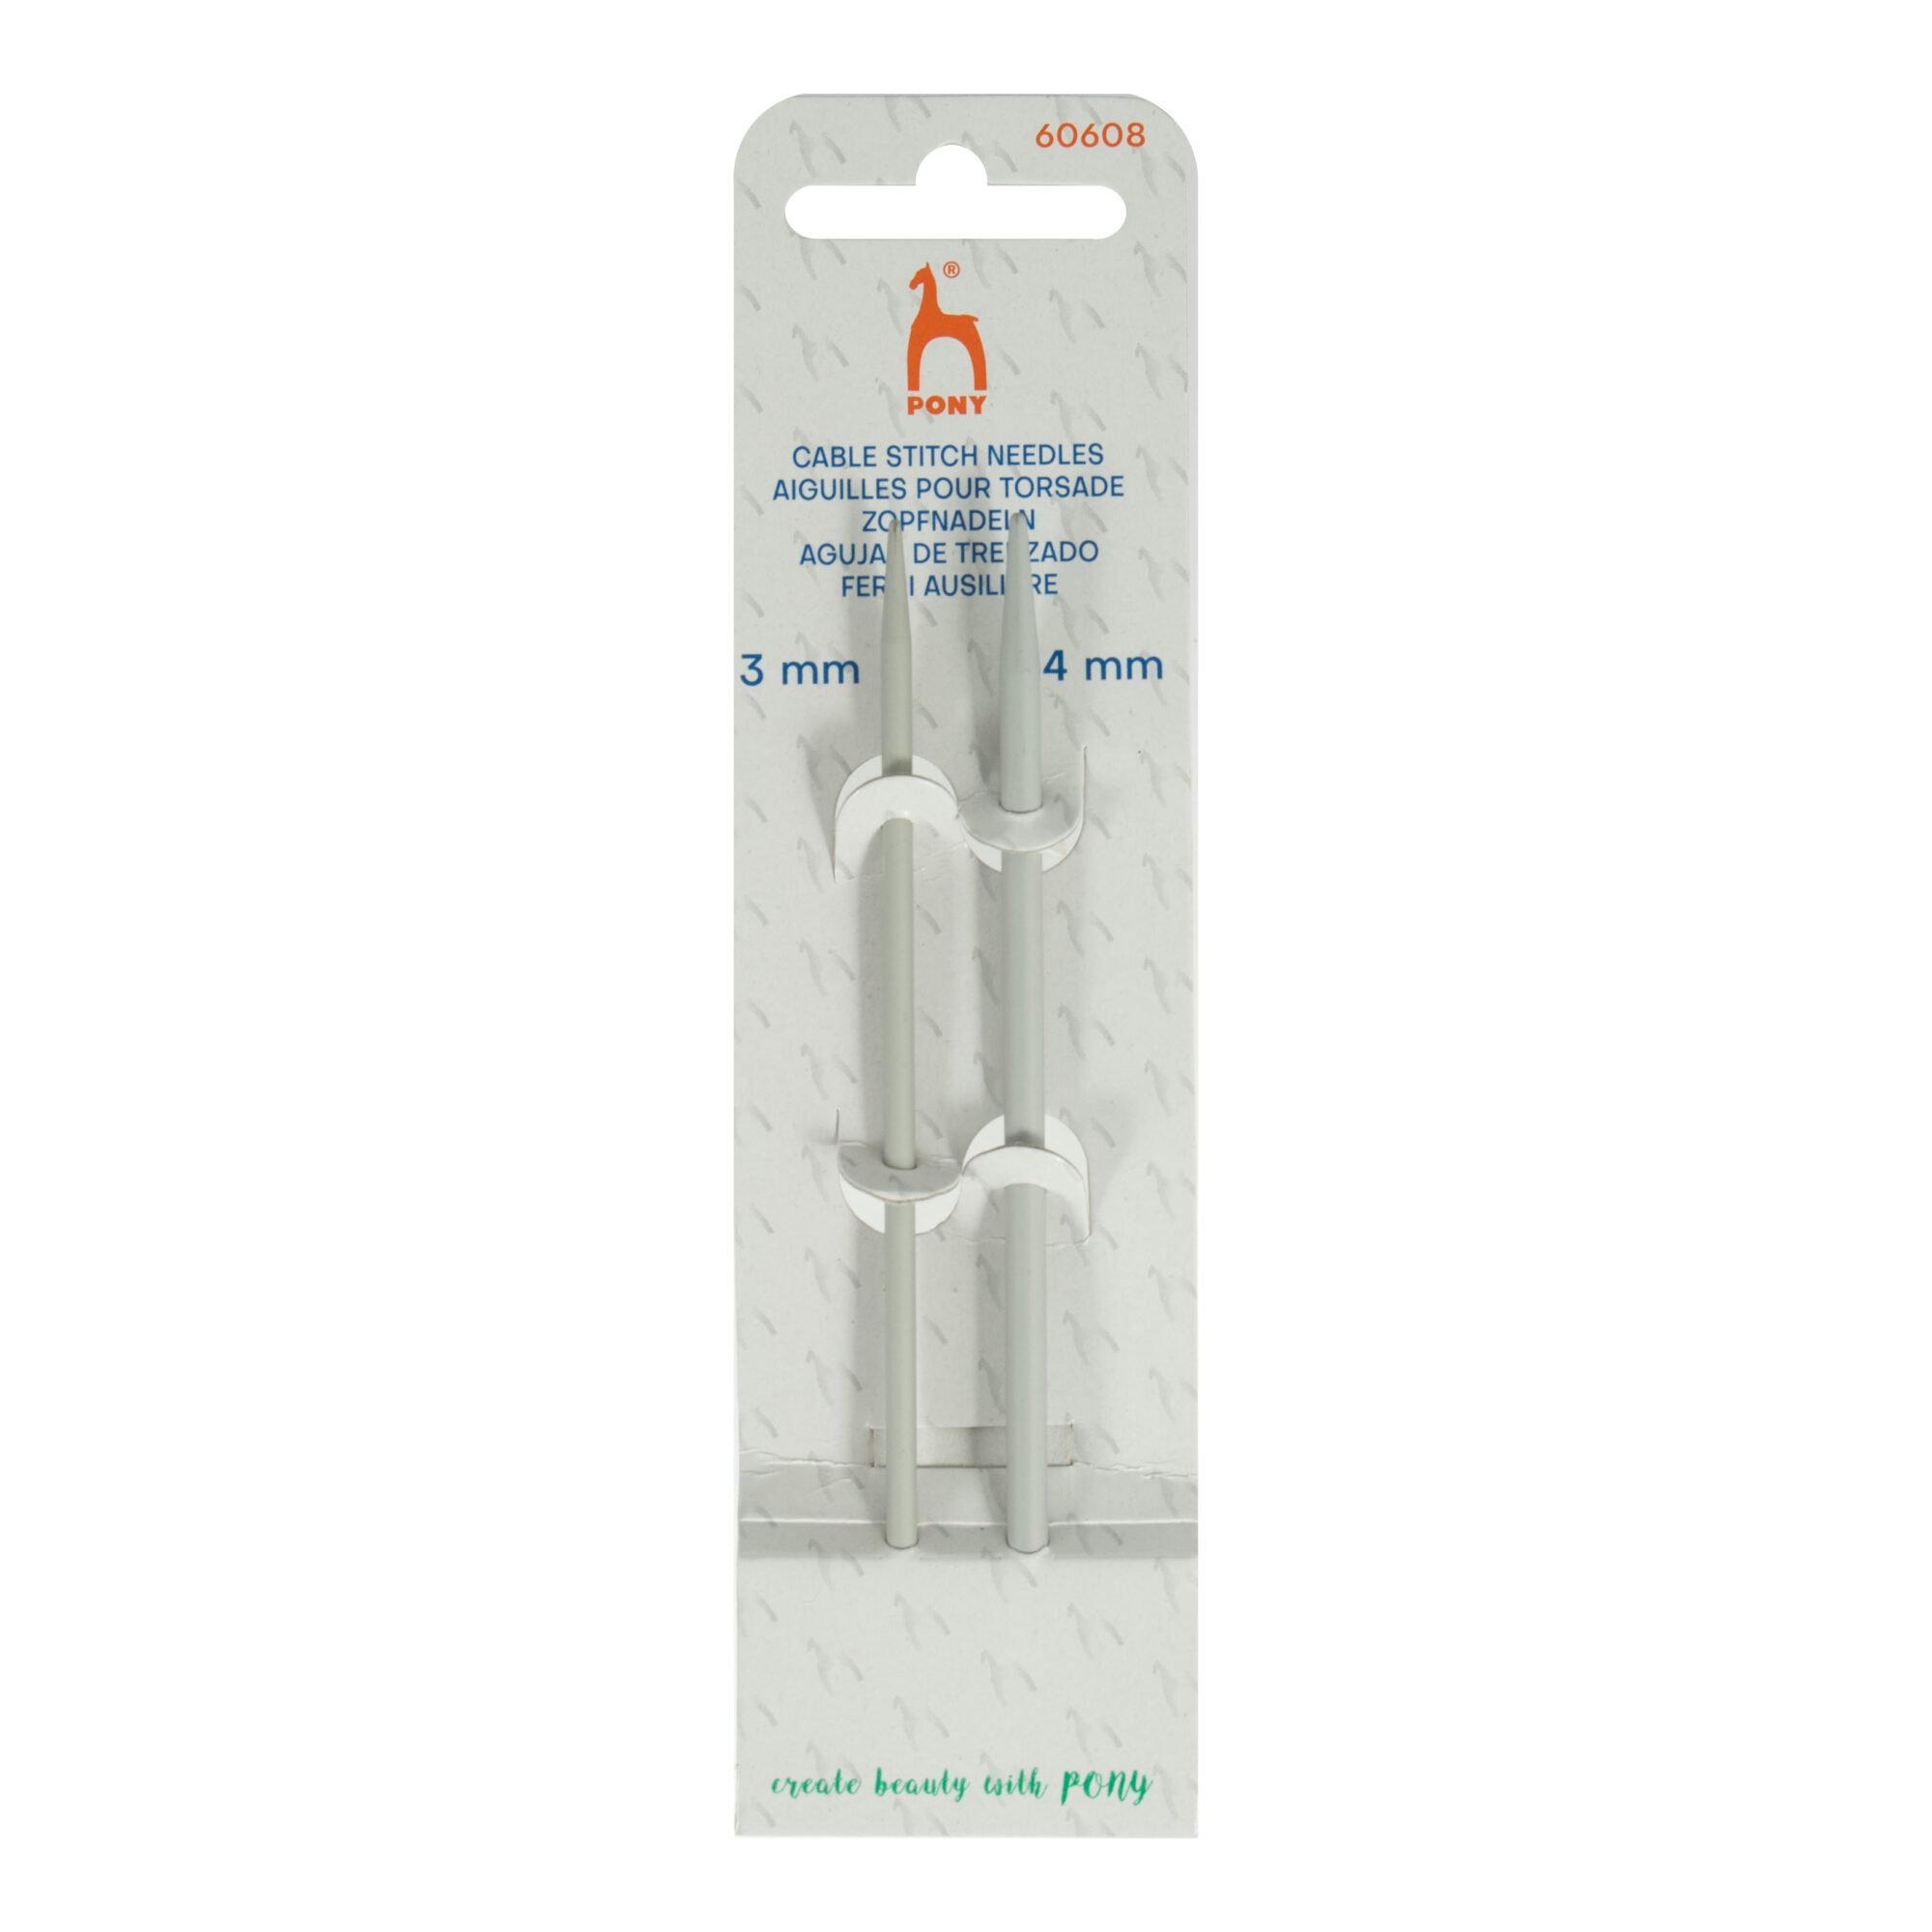 Pony Cable Needles 3 & 4mm product image